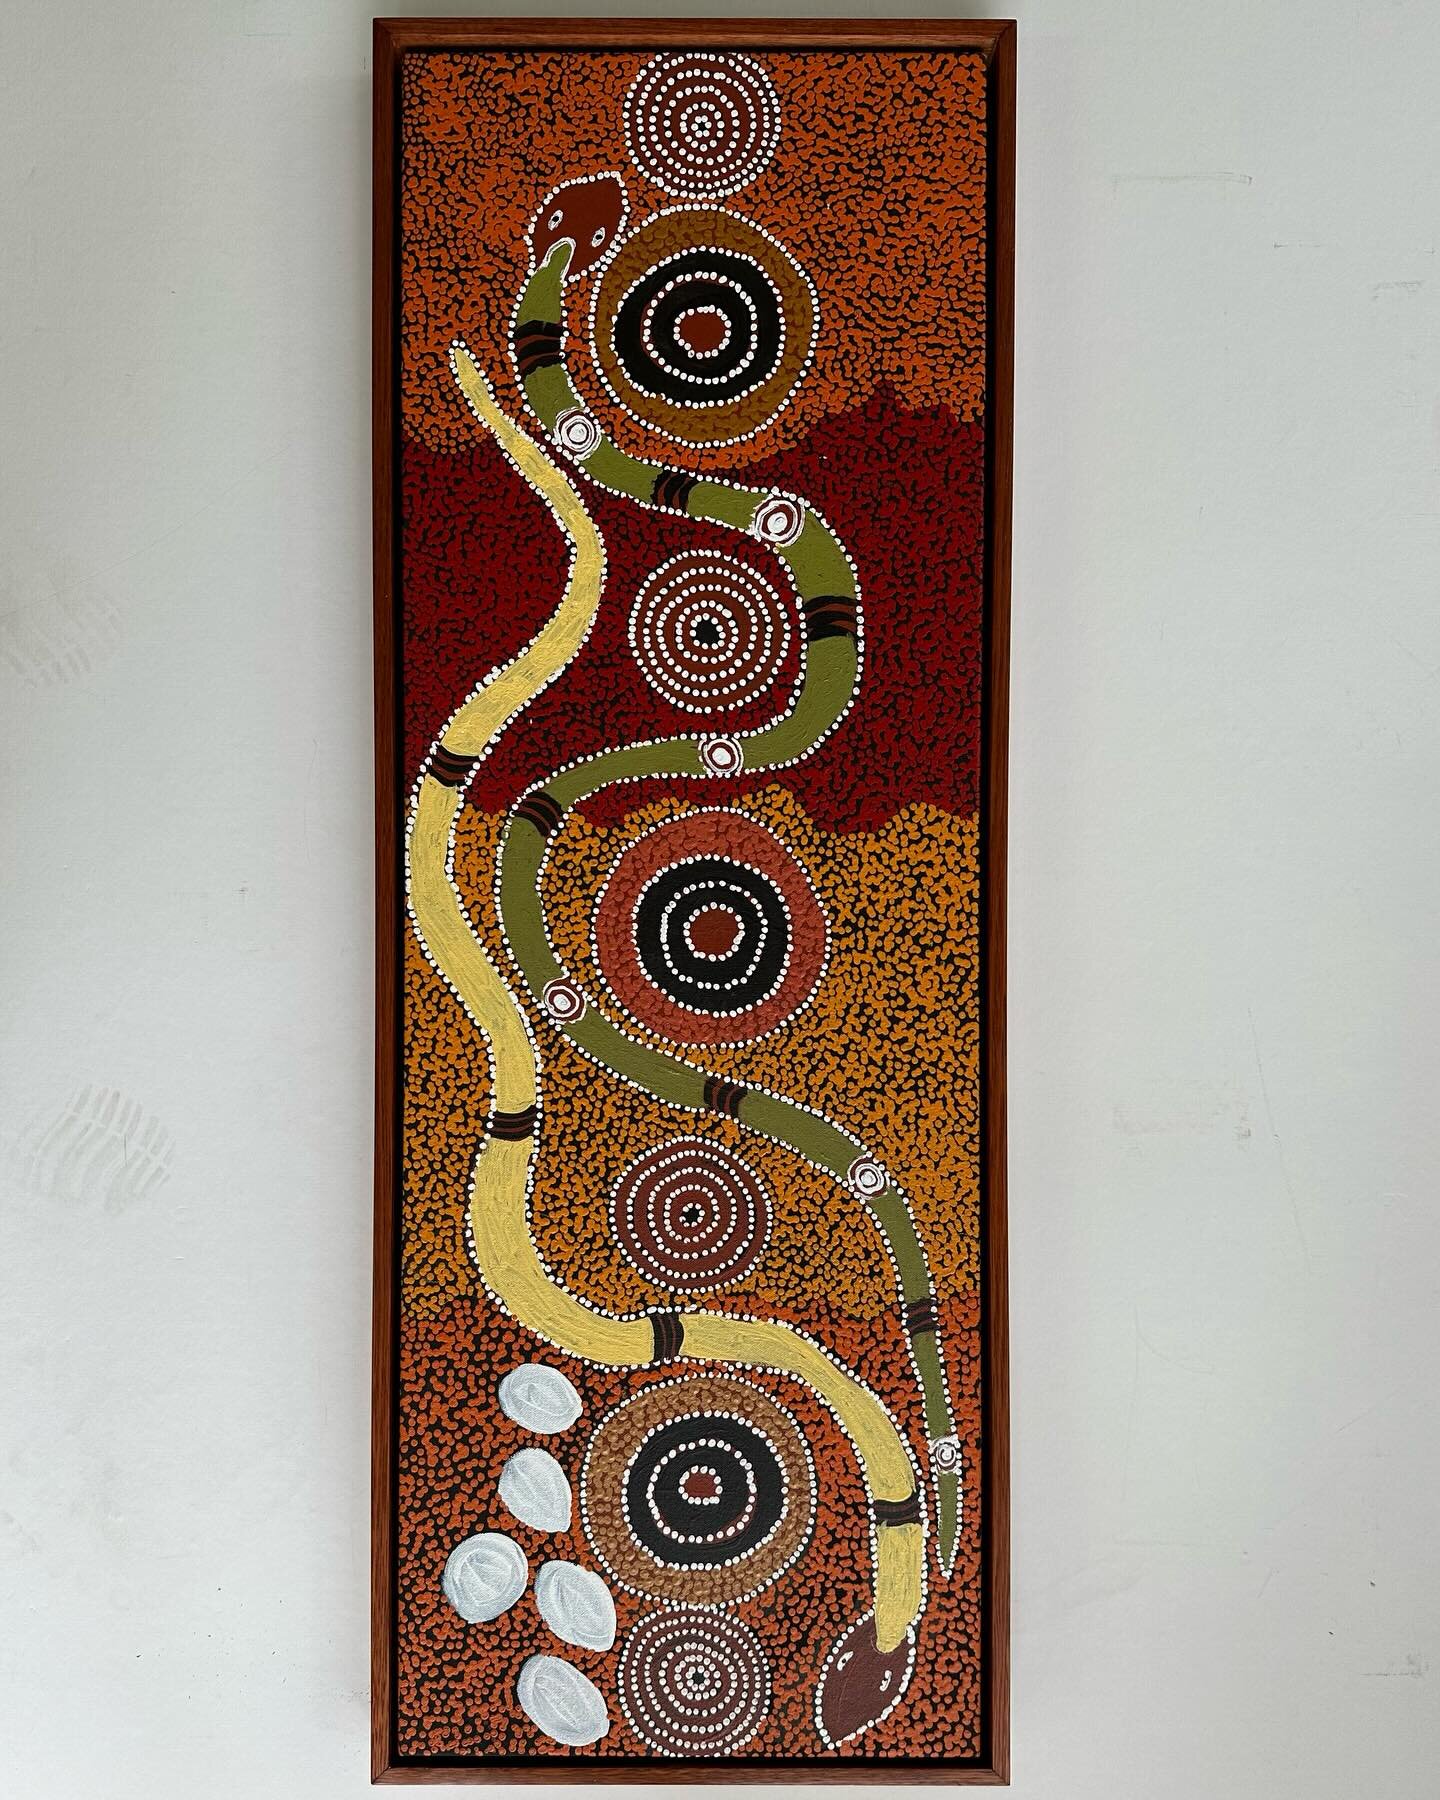 A gorgeous indigenous artwork framed in one of our handcoloured float frames. Simple and stylish! #framingfabulous #framingbrisbane #brisbaneframing #floaterframe #floatingframes #customframes #customcolour #indigenousartwork #canvasstretching